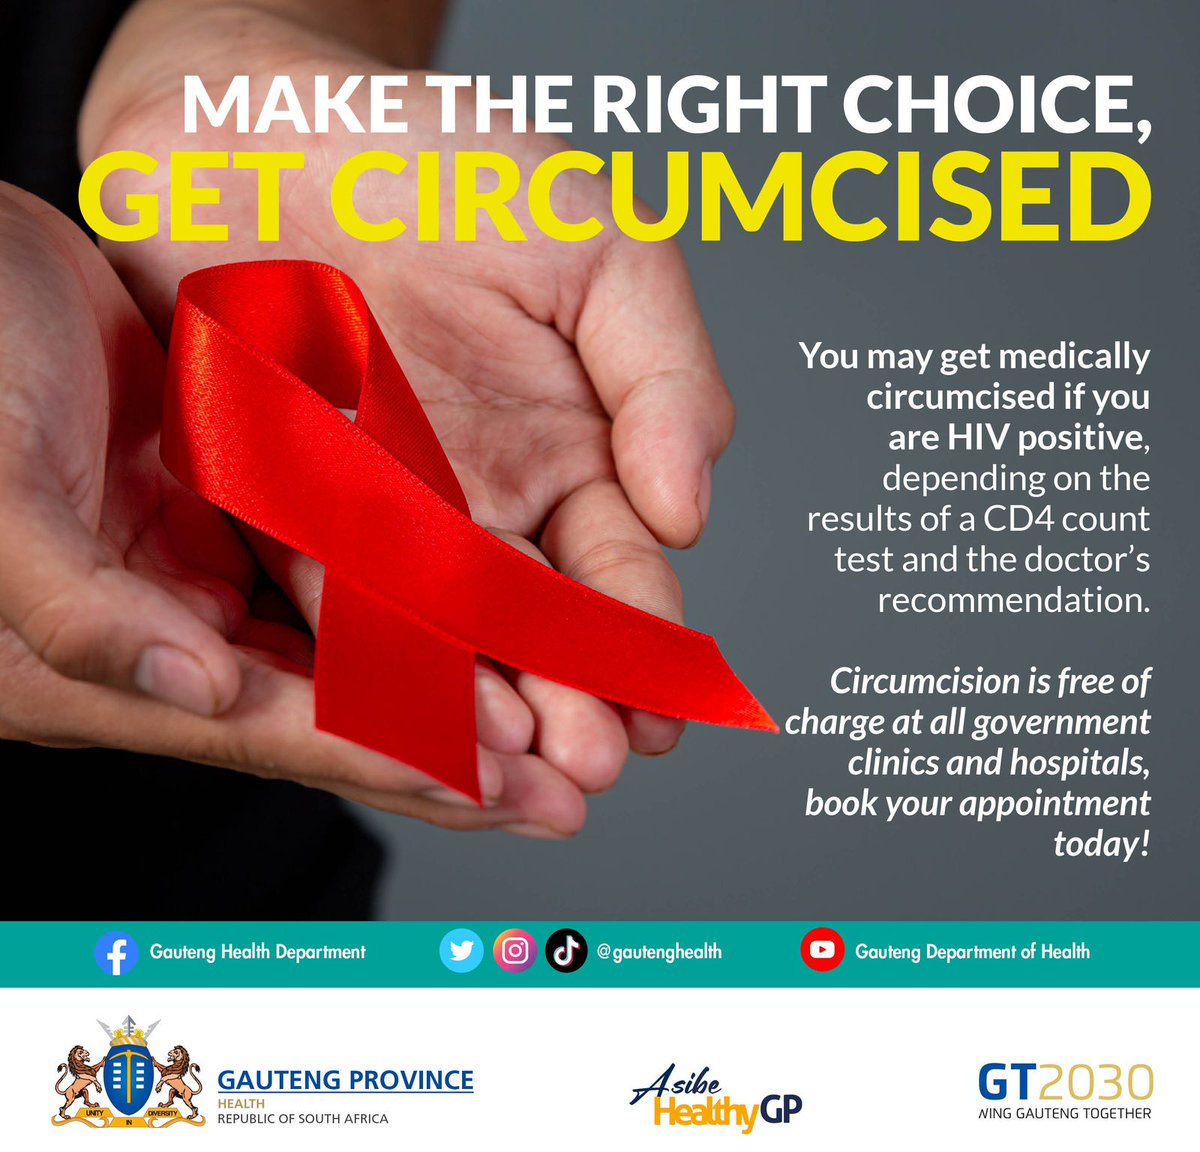 Circumcision reduces HIV infection by 60%. However, even if you’re positive, you can still get circumcised. You’ll be offered support and if you’re not on ARVs, you’ll be initiated and a future appointment will be made for you if you’re not eligible at the time#MakeTheRightChoice